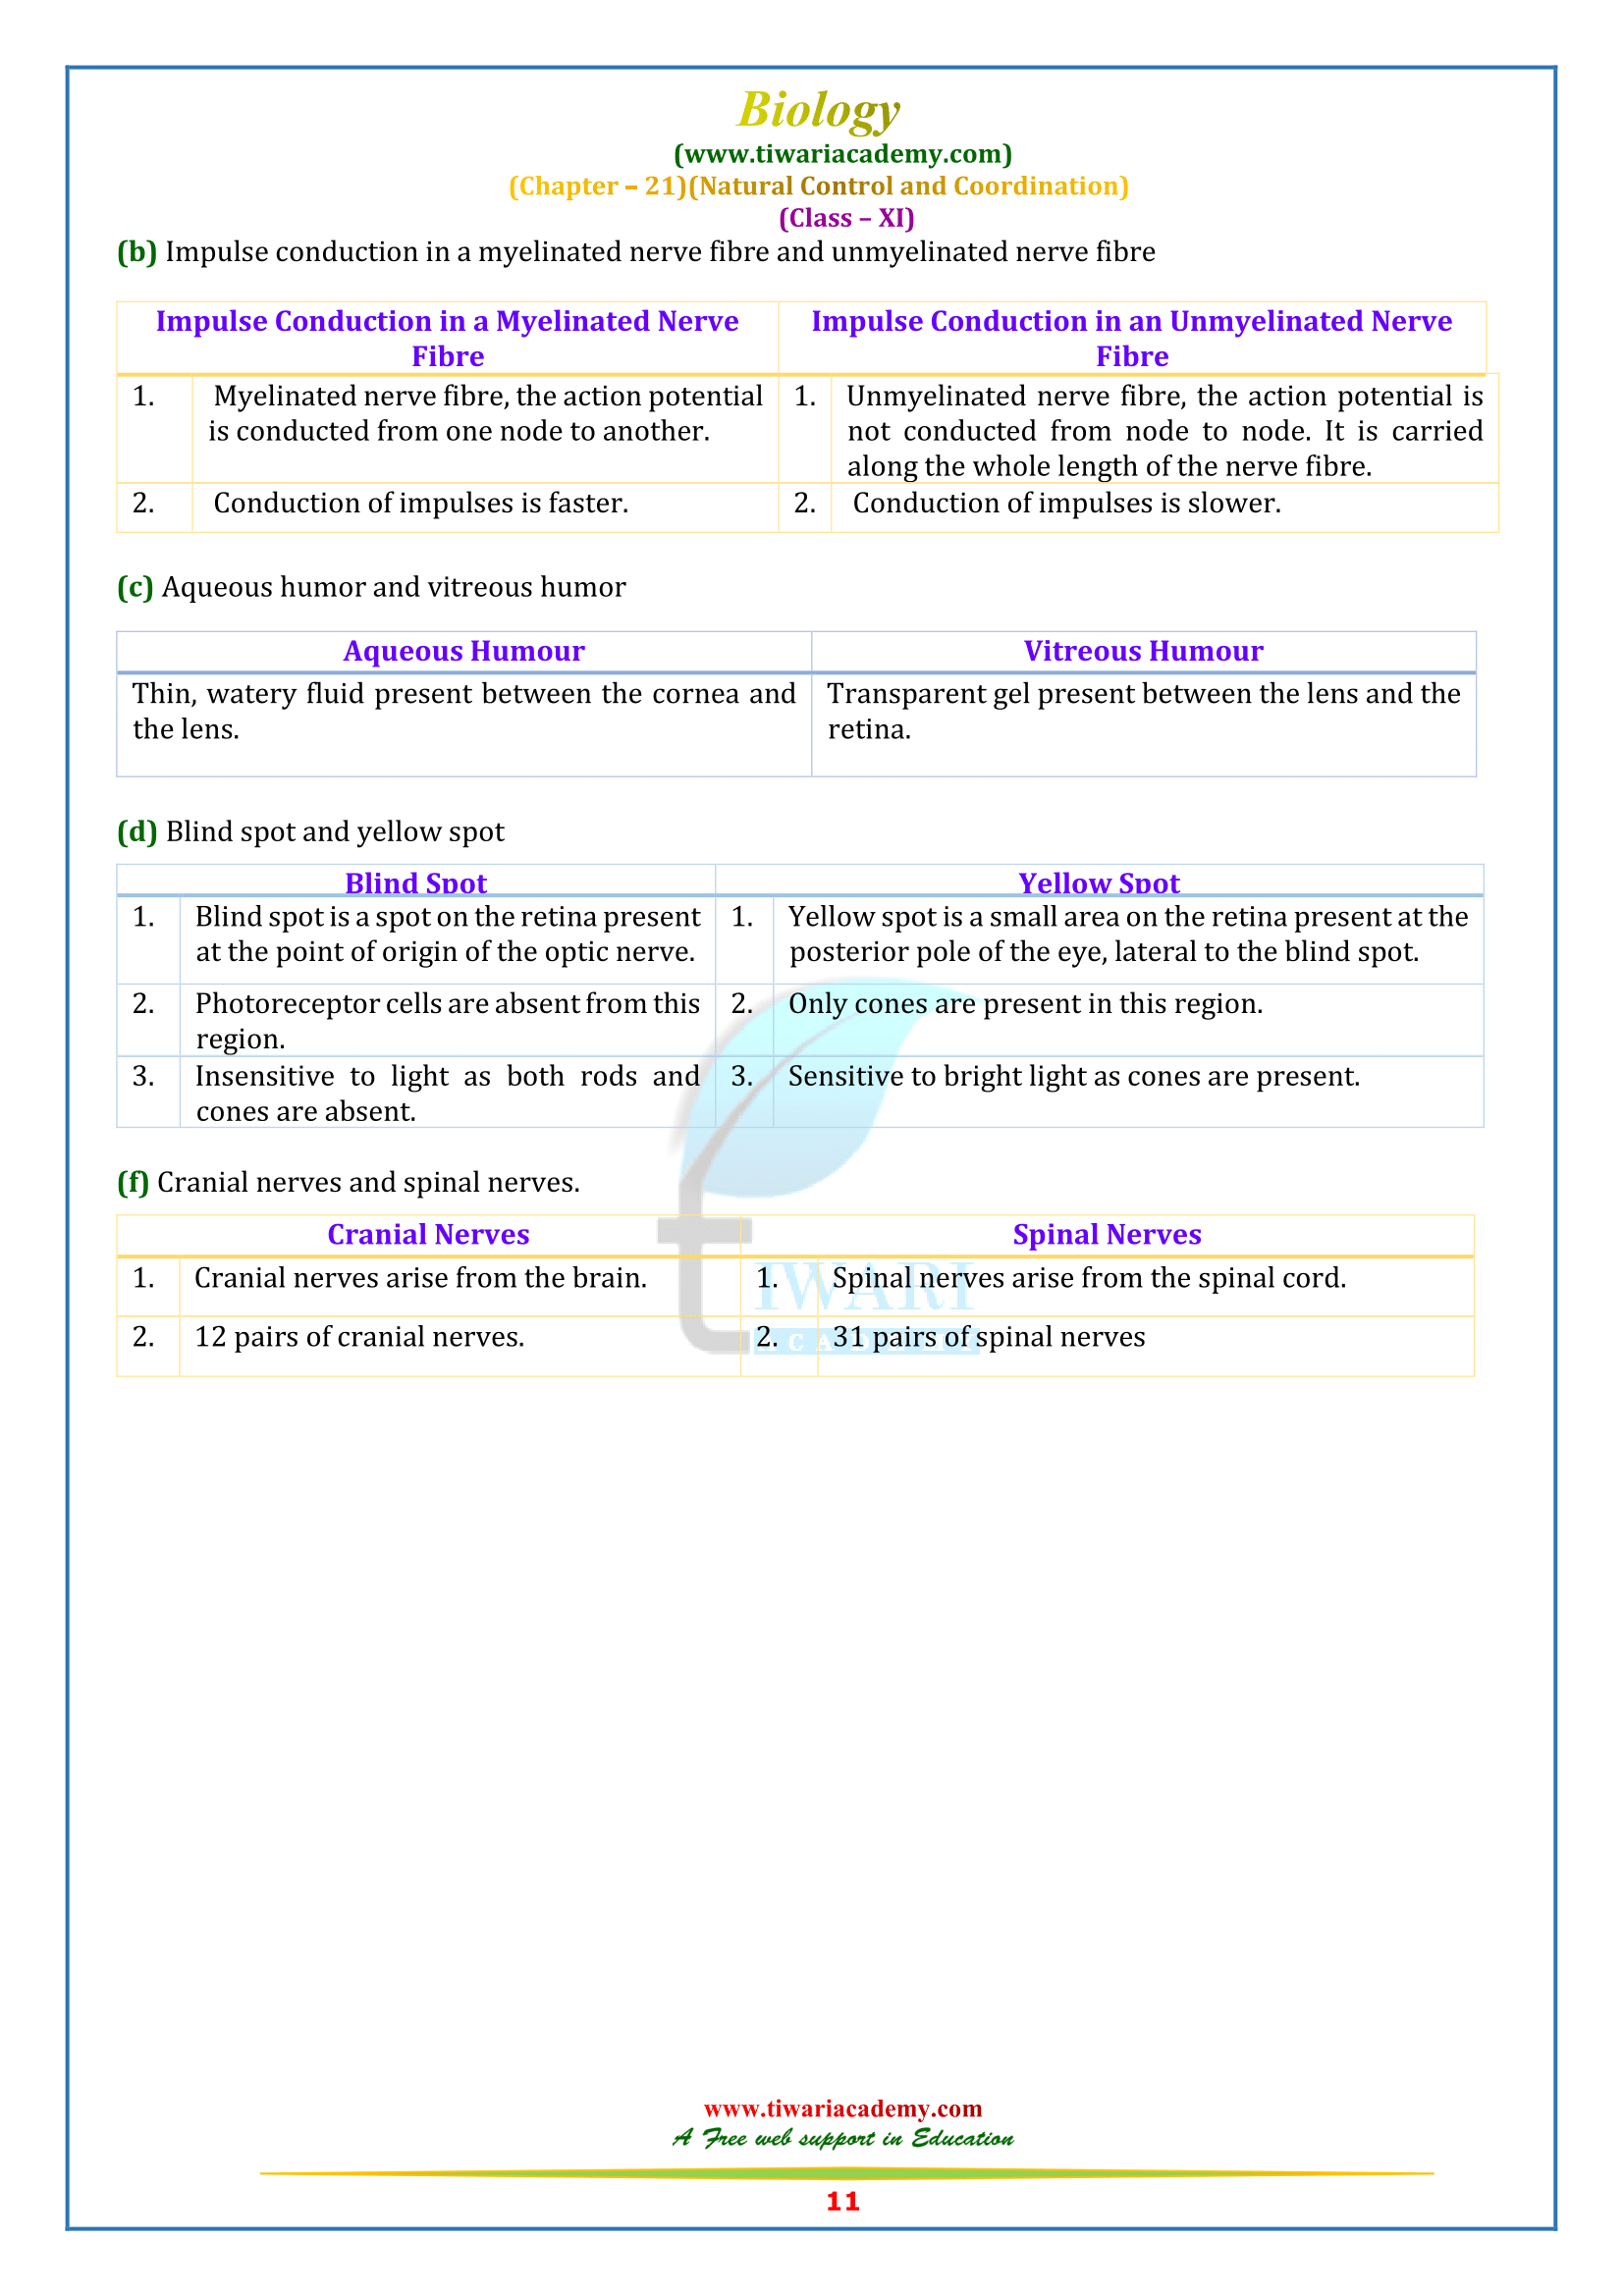 solutions of 11 bio ch. 21